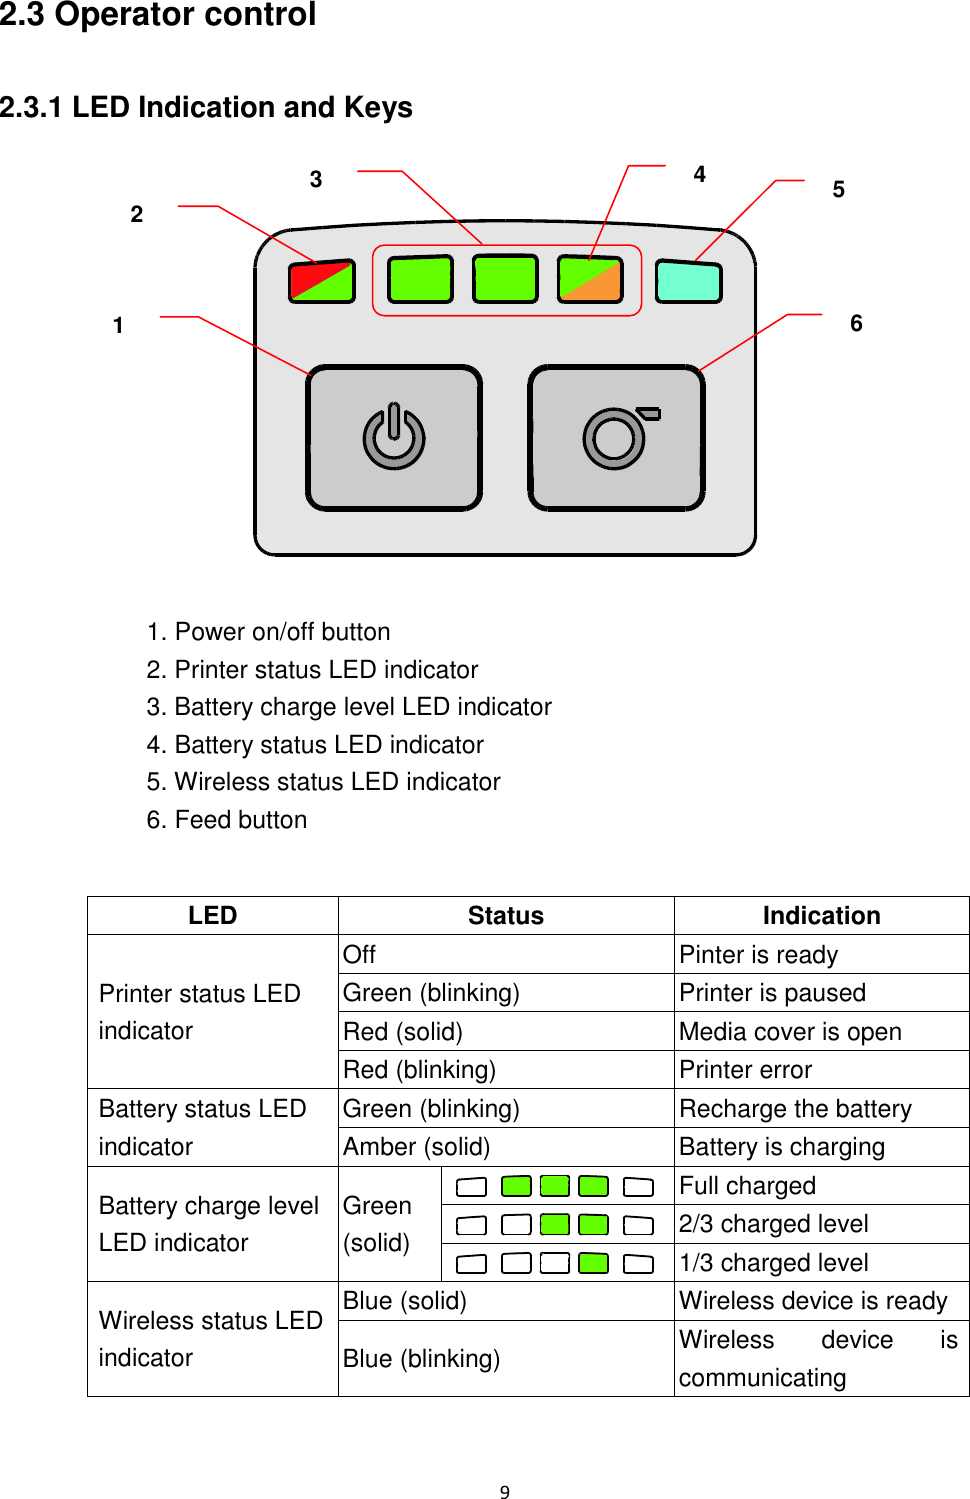 9  2.3 Operator control  2.3.1 LED Indication and Keys     1. Power on/off button 2. Printer status LED indicator 3. Battery charge level LED indicator 4. Battery status LED indicator 5. Wireless status LED indicator 6. Feed button      LED Status Indication Printer status LED indicator Off Pinter is ready Green (blinking) Printer is paused Red (solid) Media cover is open Red (blinking) Printer error Battery status LED indicator Green (blinking) Recharge the battery Amber (solid) Battery is charging Battery charge level LED indicator Green (solid)  Full charged  2/3 charged level  1/3 charged level Wireless status LED indicator Blue (solid) Wireless device is ready Blue (blinking) Wireless  device  is communicating 2 3 4 5 1 6 